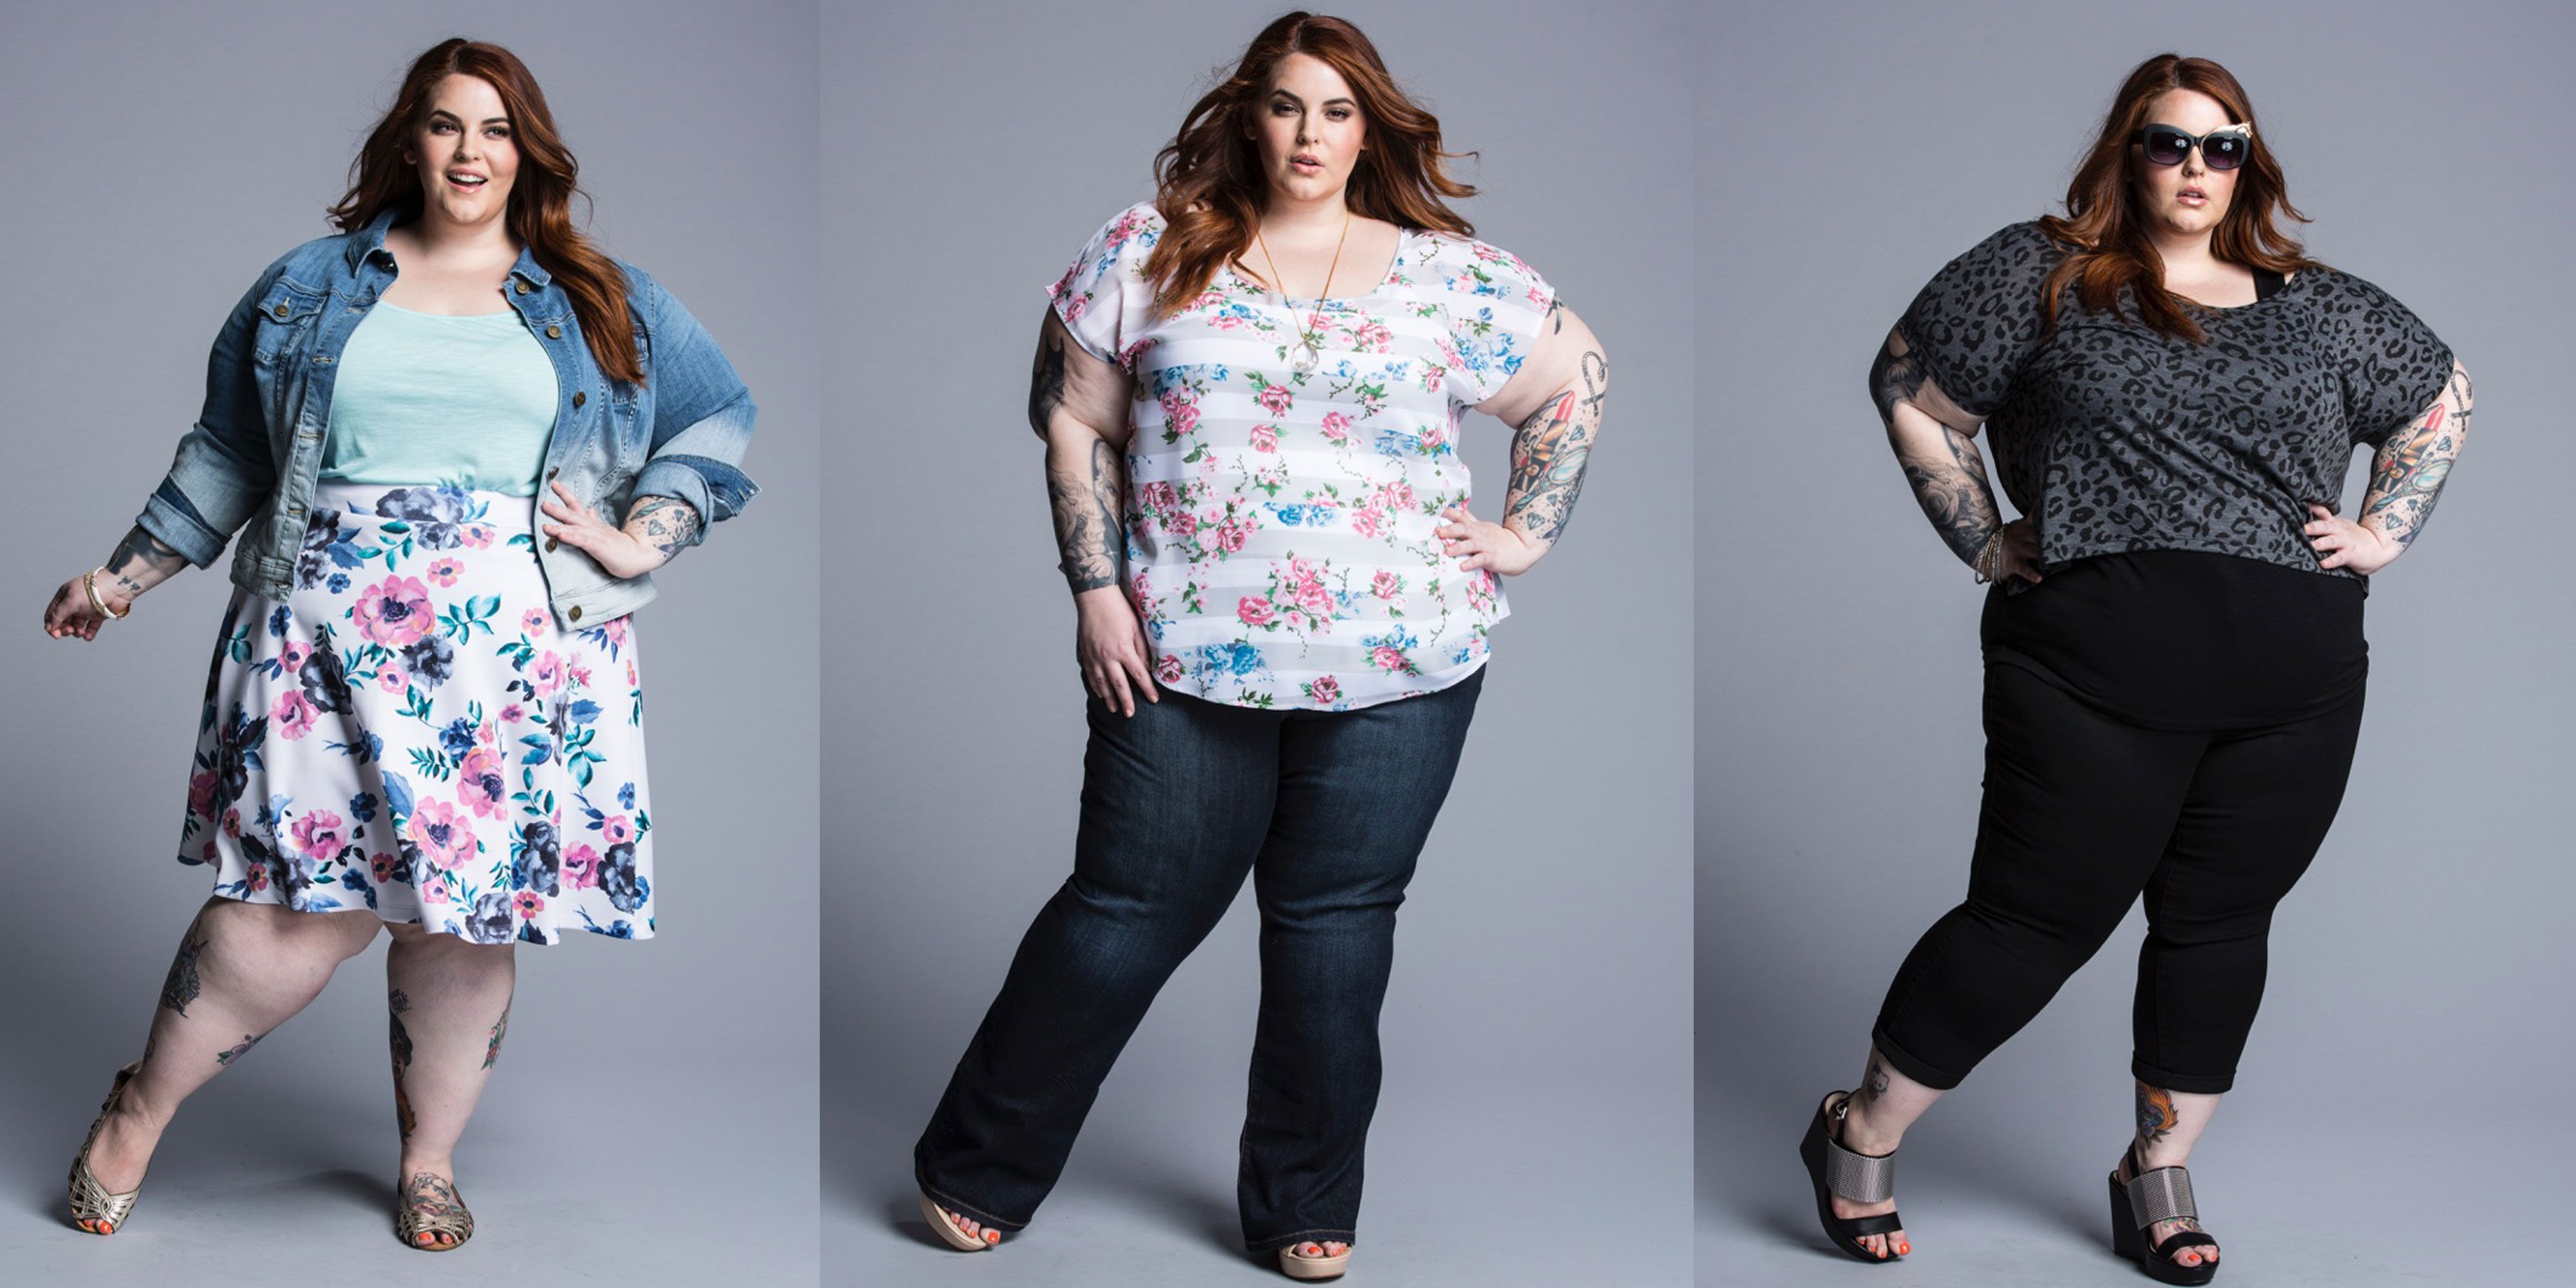 Model Tess Holliday Slays Her First Ad Campaign With Torrid